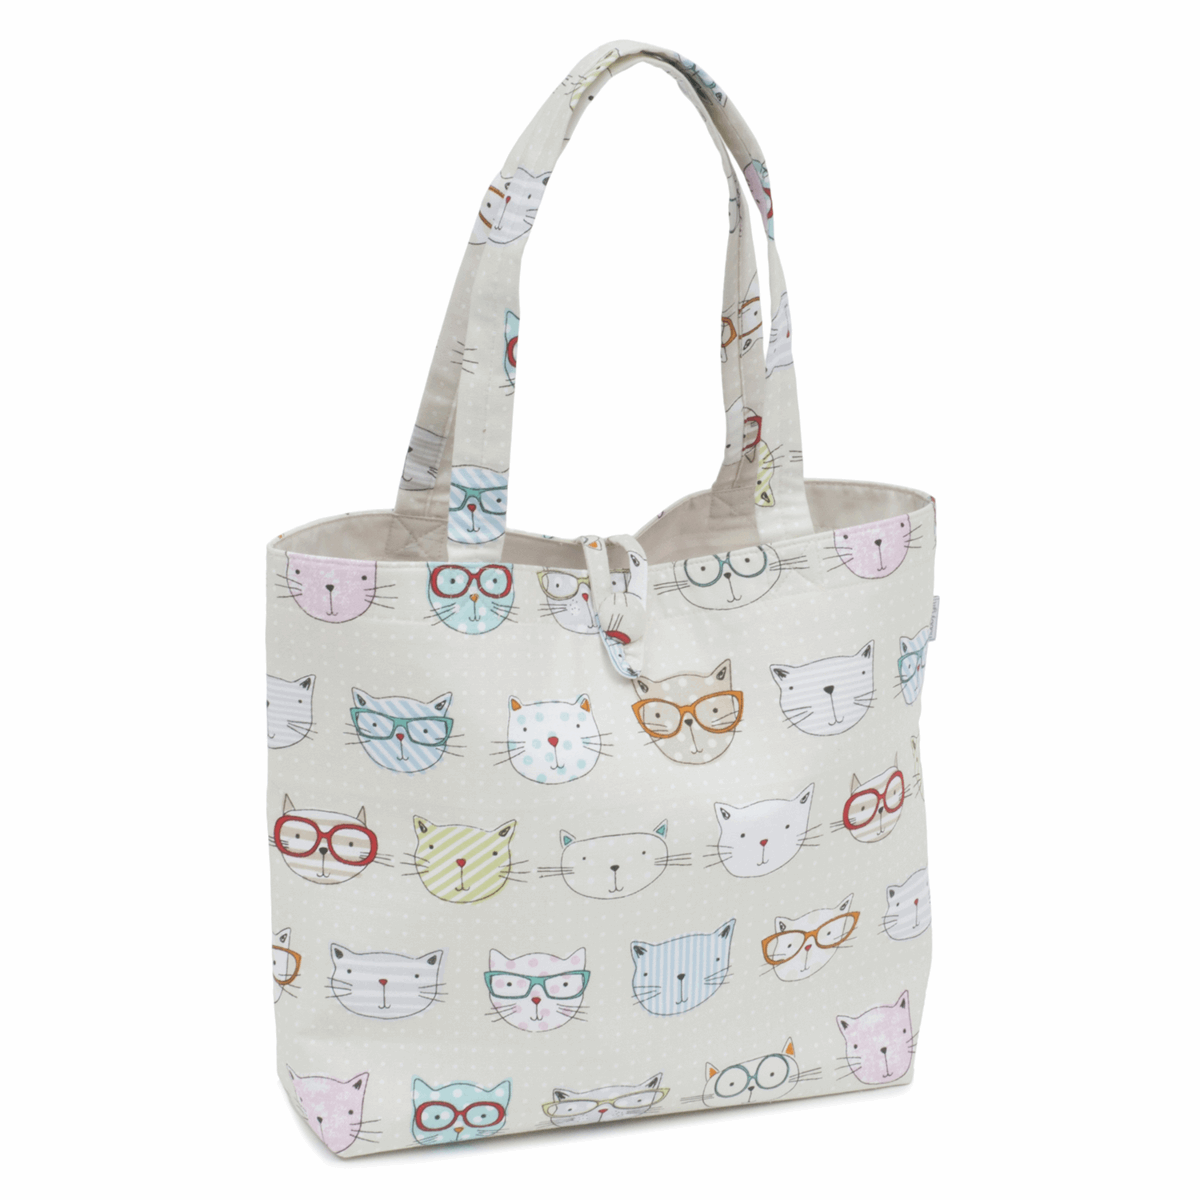 Craft Tote Bag - Cool Cats